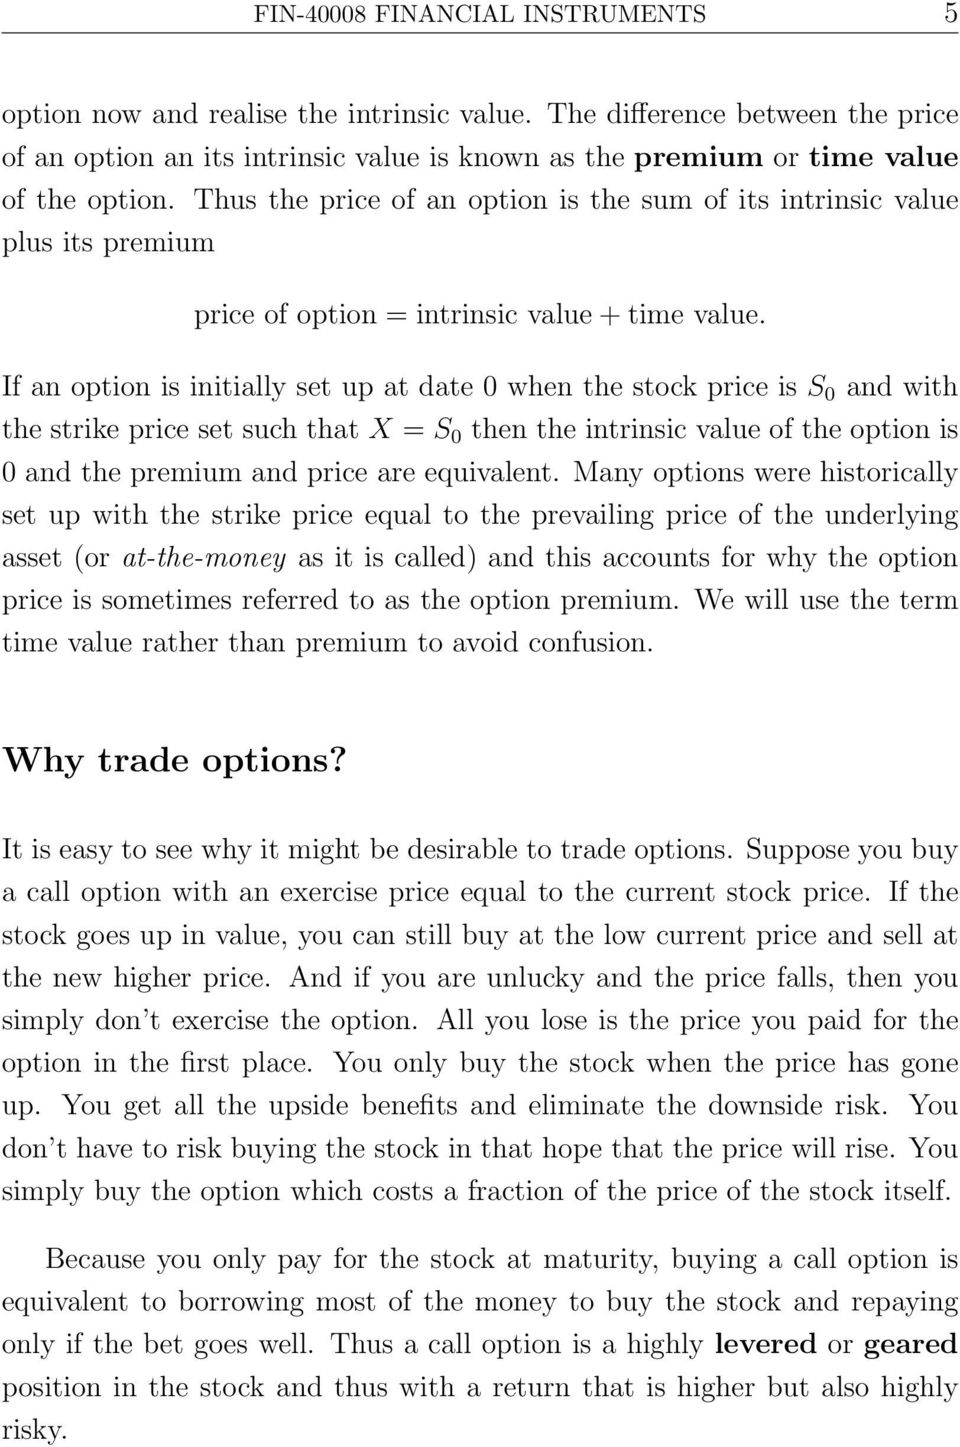 If an option is initially set up at date 0 when the stock price is S 0 and with the strike price set such that X = S 0 then the intrinsic value of the option is 0 and the premium and price are